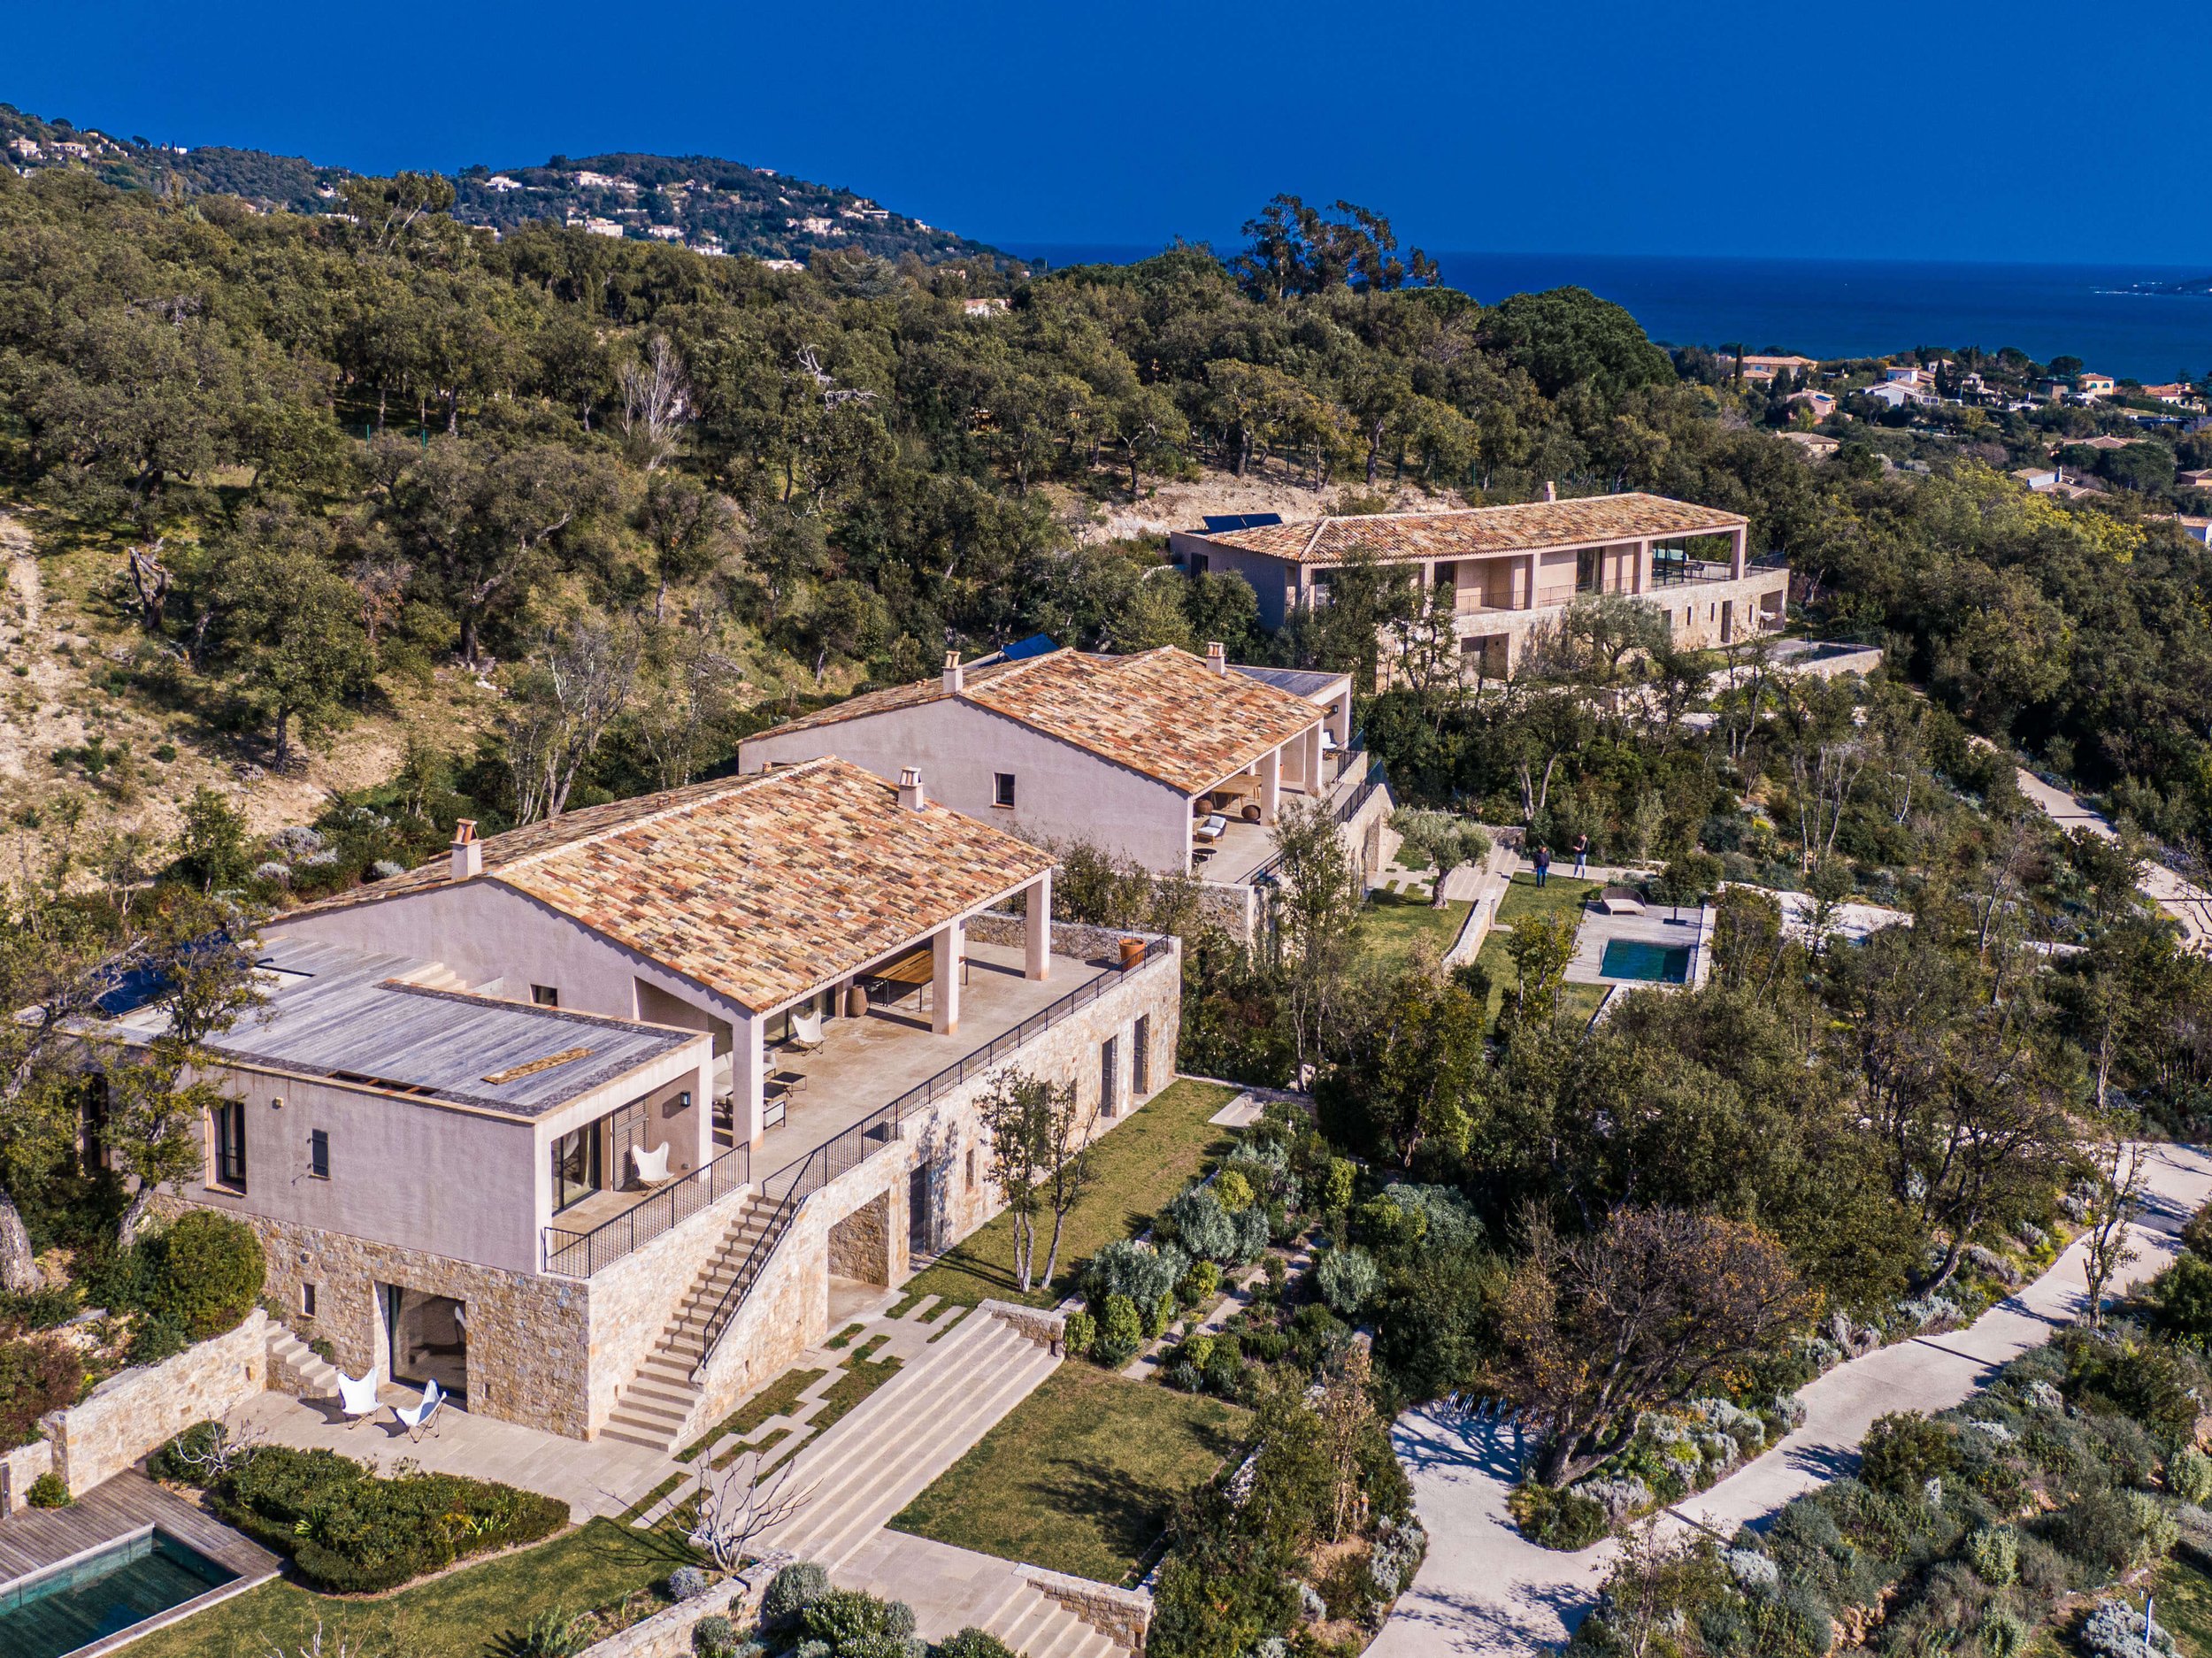 Luxury estate on the Côte d'Azur and the Mediterranean, sea view and swimming pool